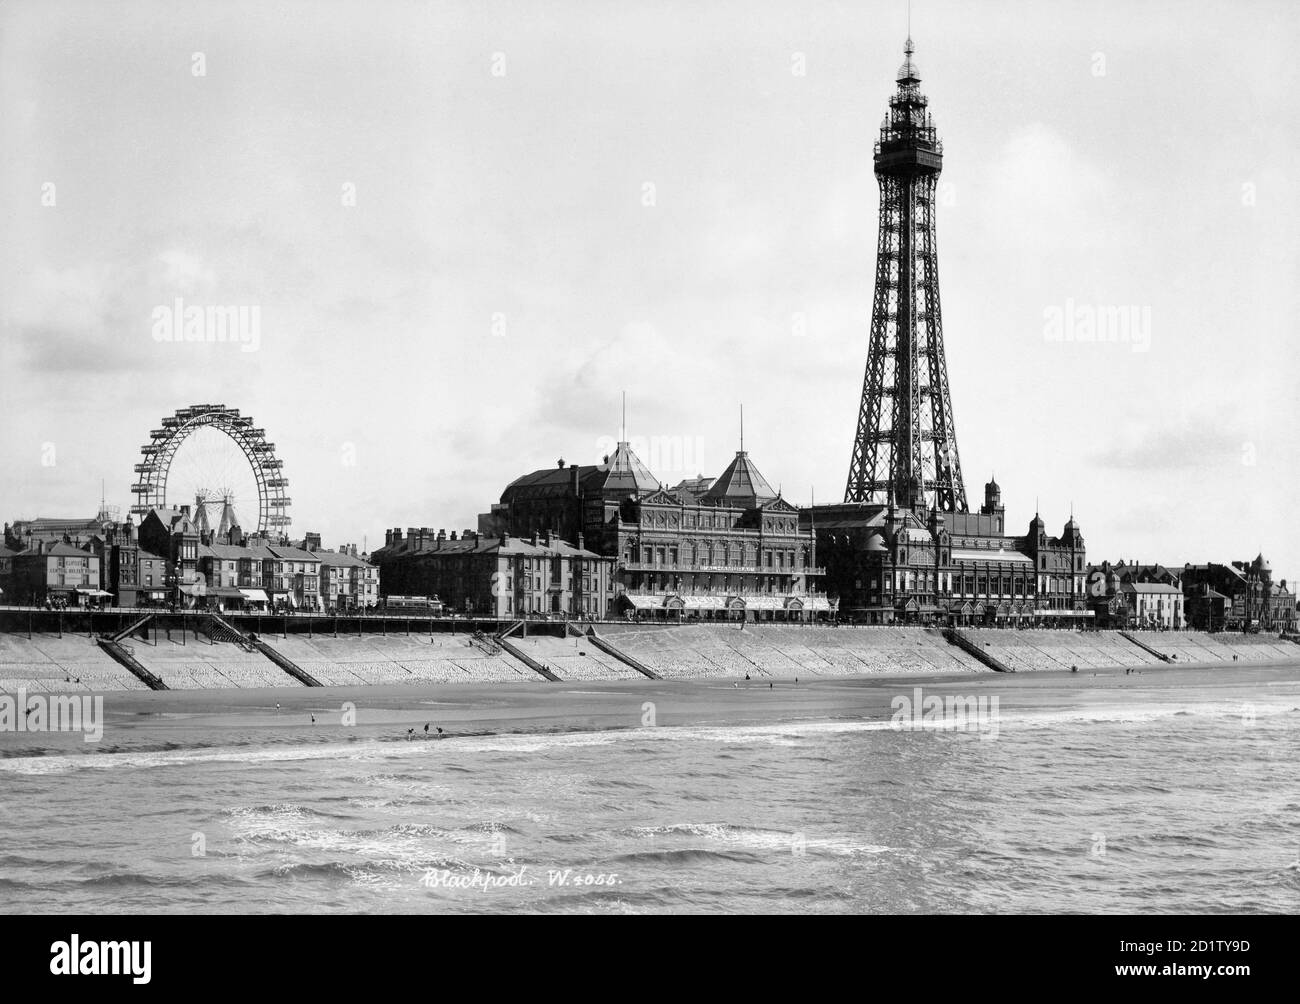 BLACKPOOL, Lancashire. A view looking south-east from the North Pier towards Blackpool Tower with the Big Wheel visible in the background. The tower was built in 1891-4 by Maxwell and Tuke and was based on the design of the Eiffel Tower in Paris. Photographed between 1894 and 1910 by W and Co. Stock Photo